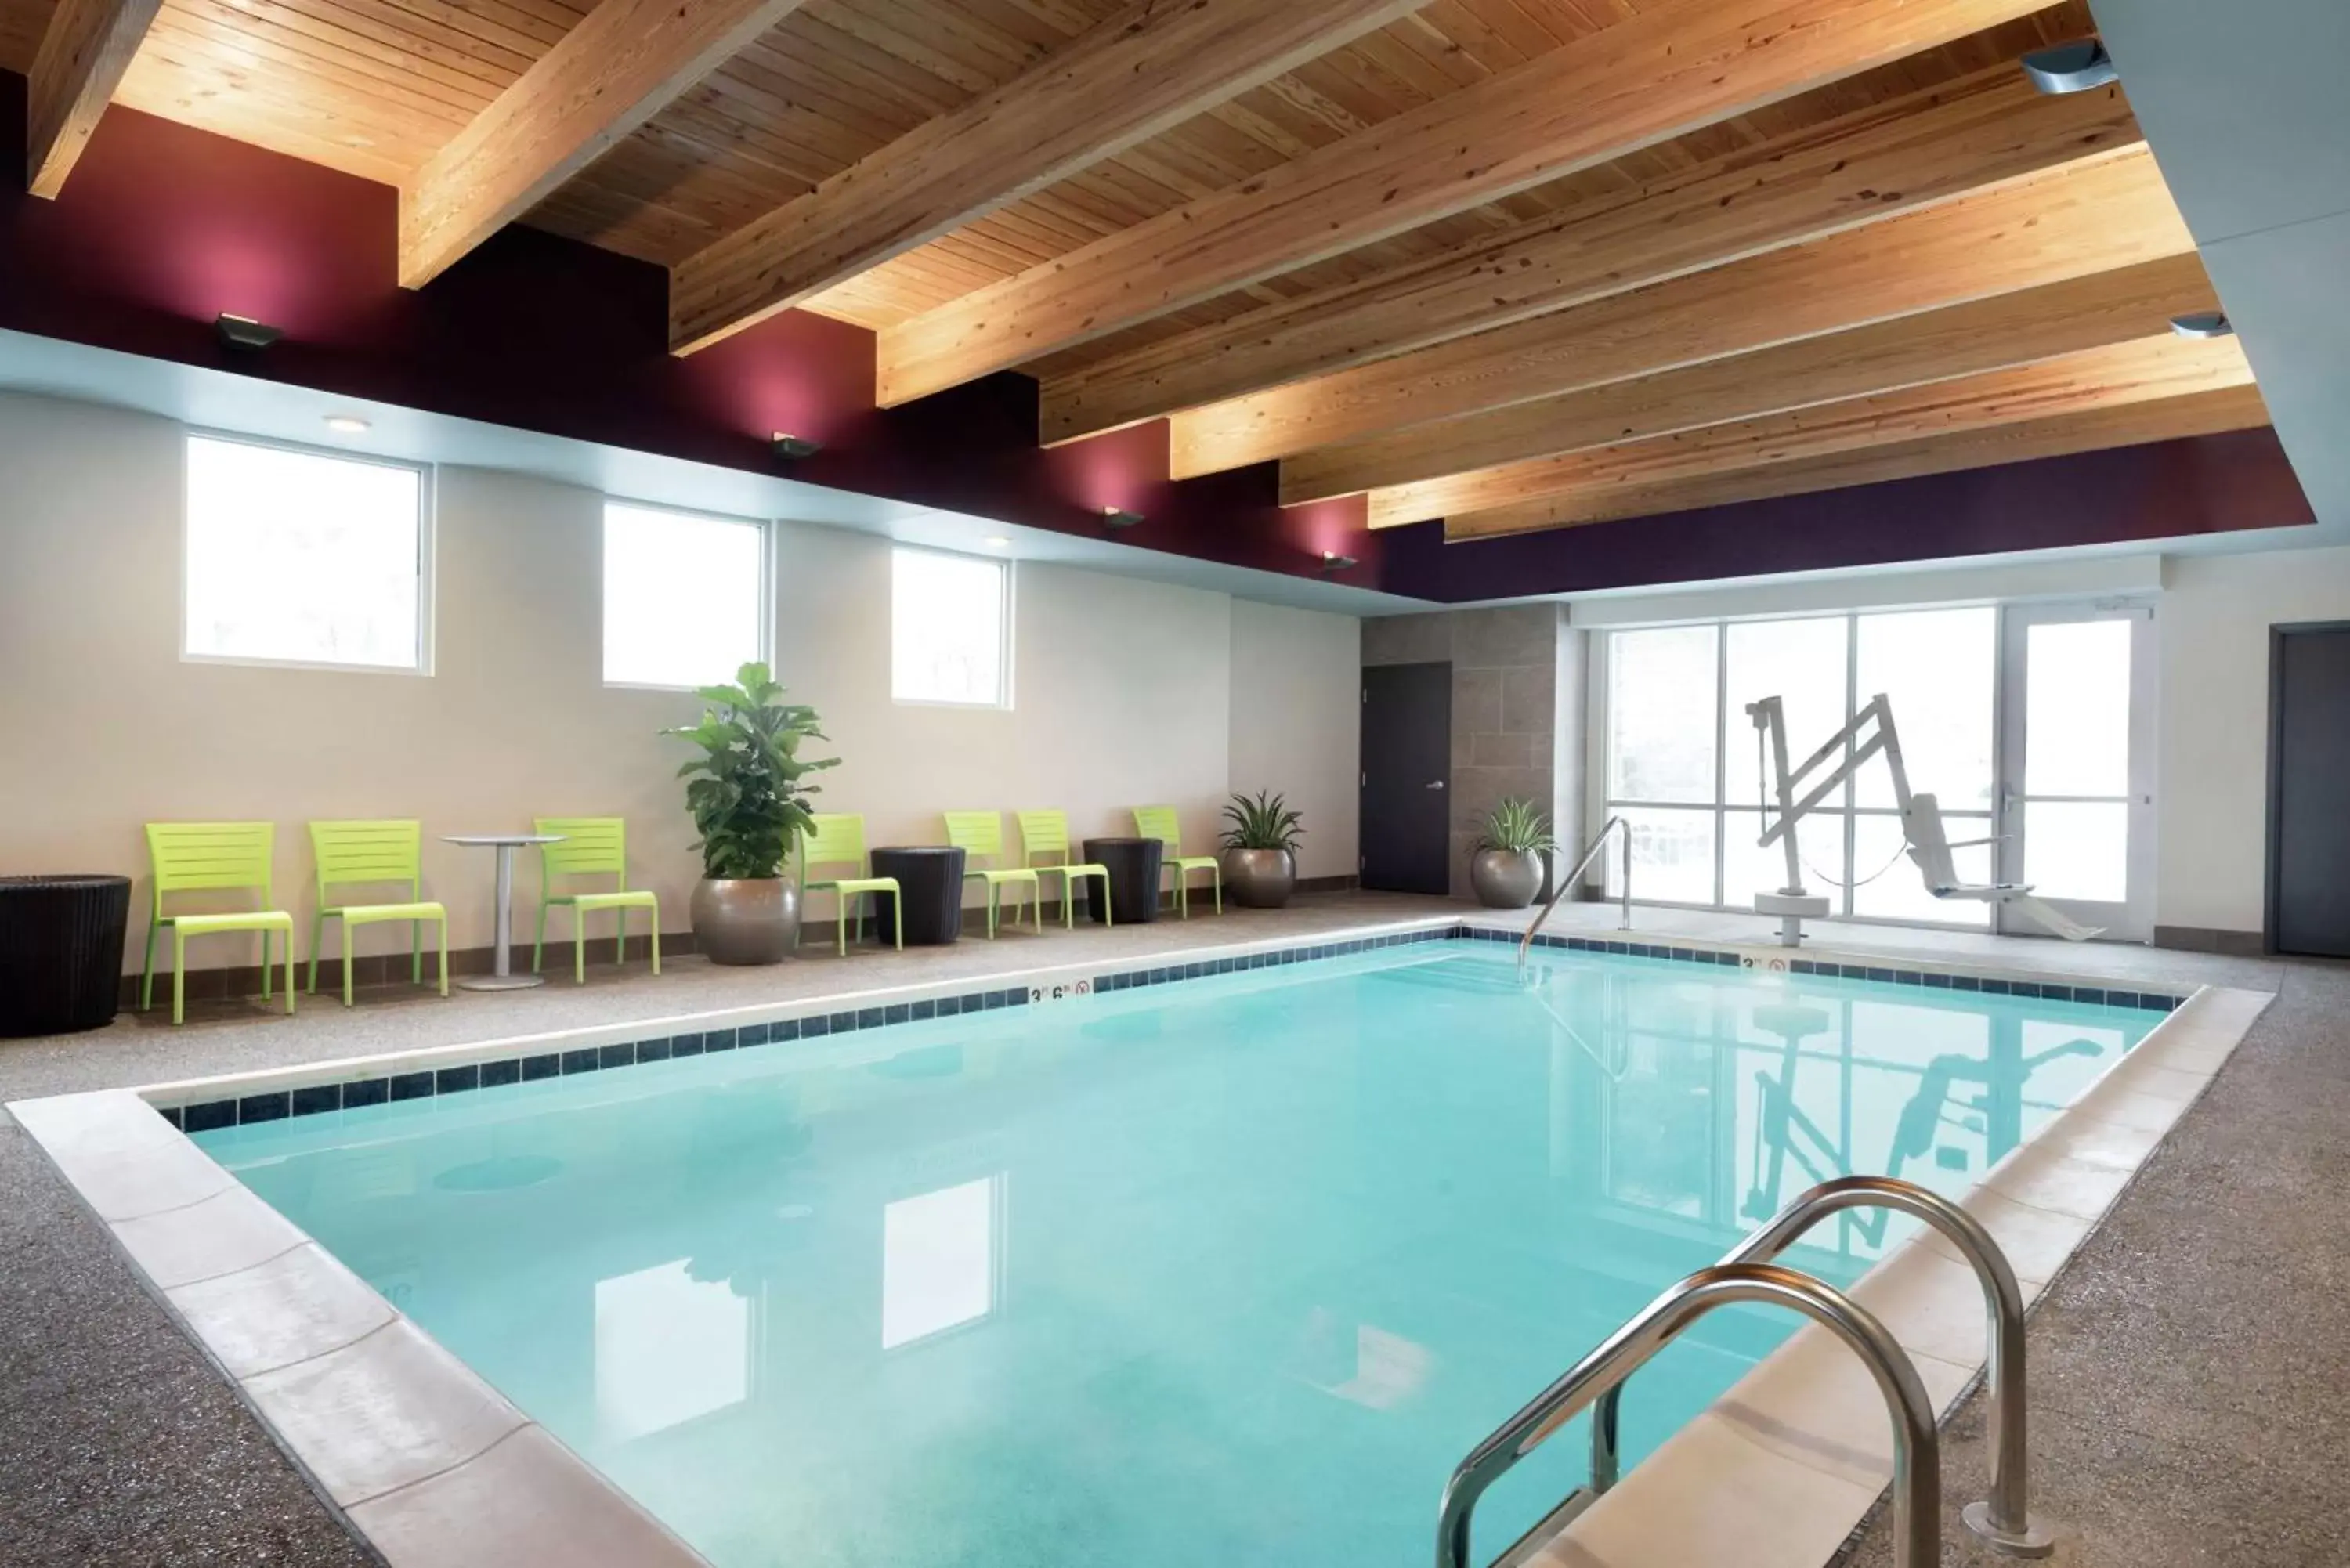 Swimming Pool in Home2 Suites by Hilton Cleveland Independence